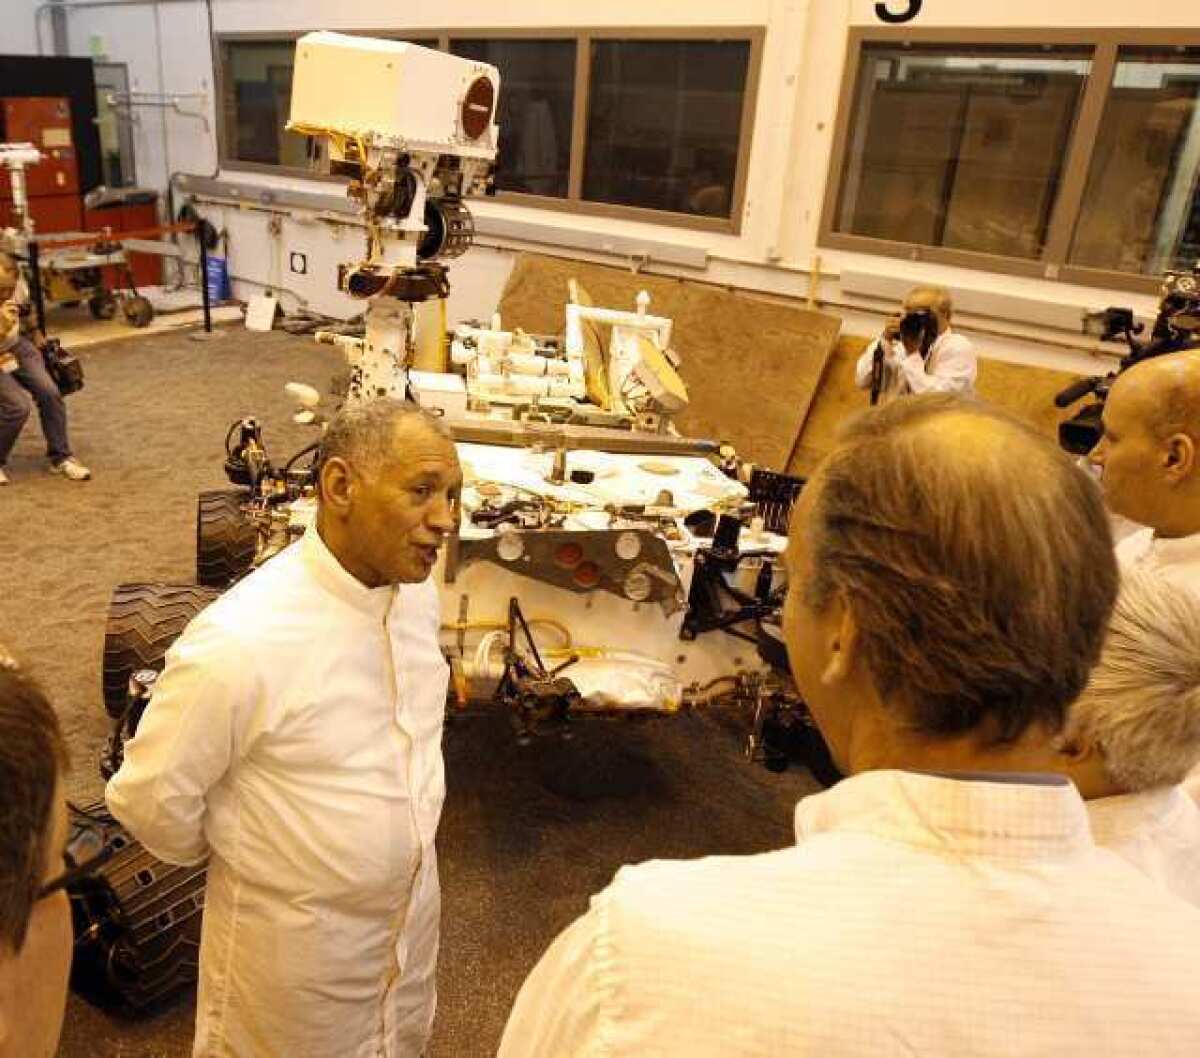 NASA Administrator Charles Bolden talks with scientist and engineers at JPL next to a duplicate of the Mars Rover Curiosity at JPL. The room is bathed in light that is similar to the light on the martian planet.